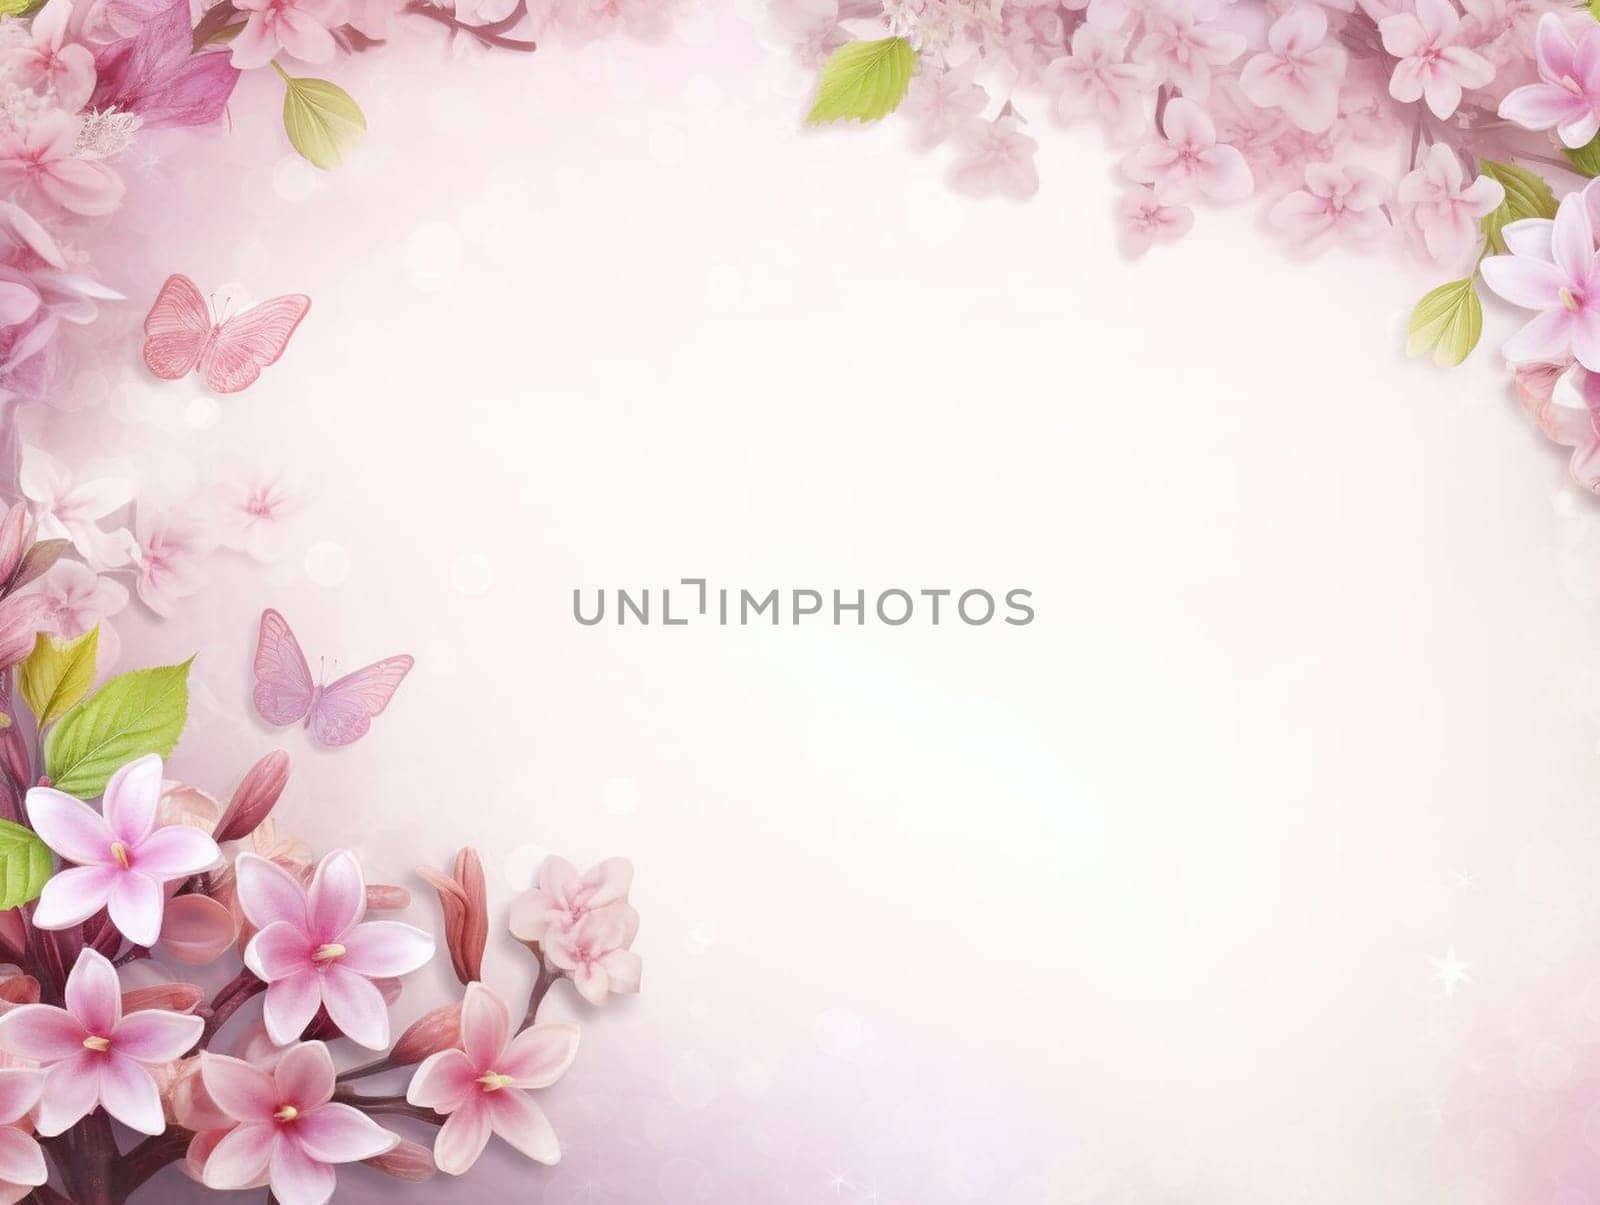 Spring and summer decorations background with beautiful wild flowers. Copy space for text banner